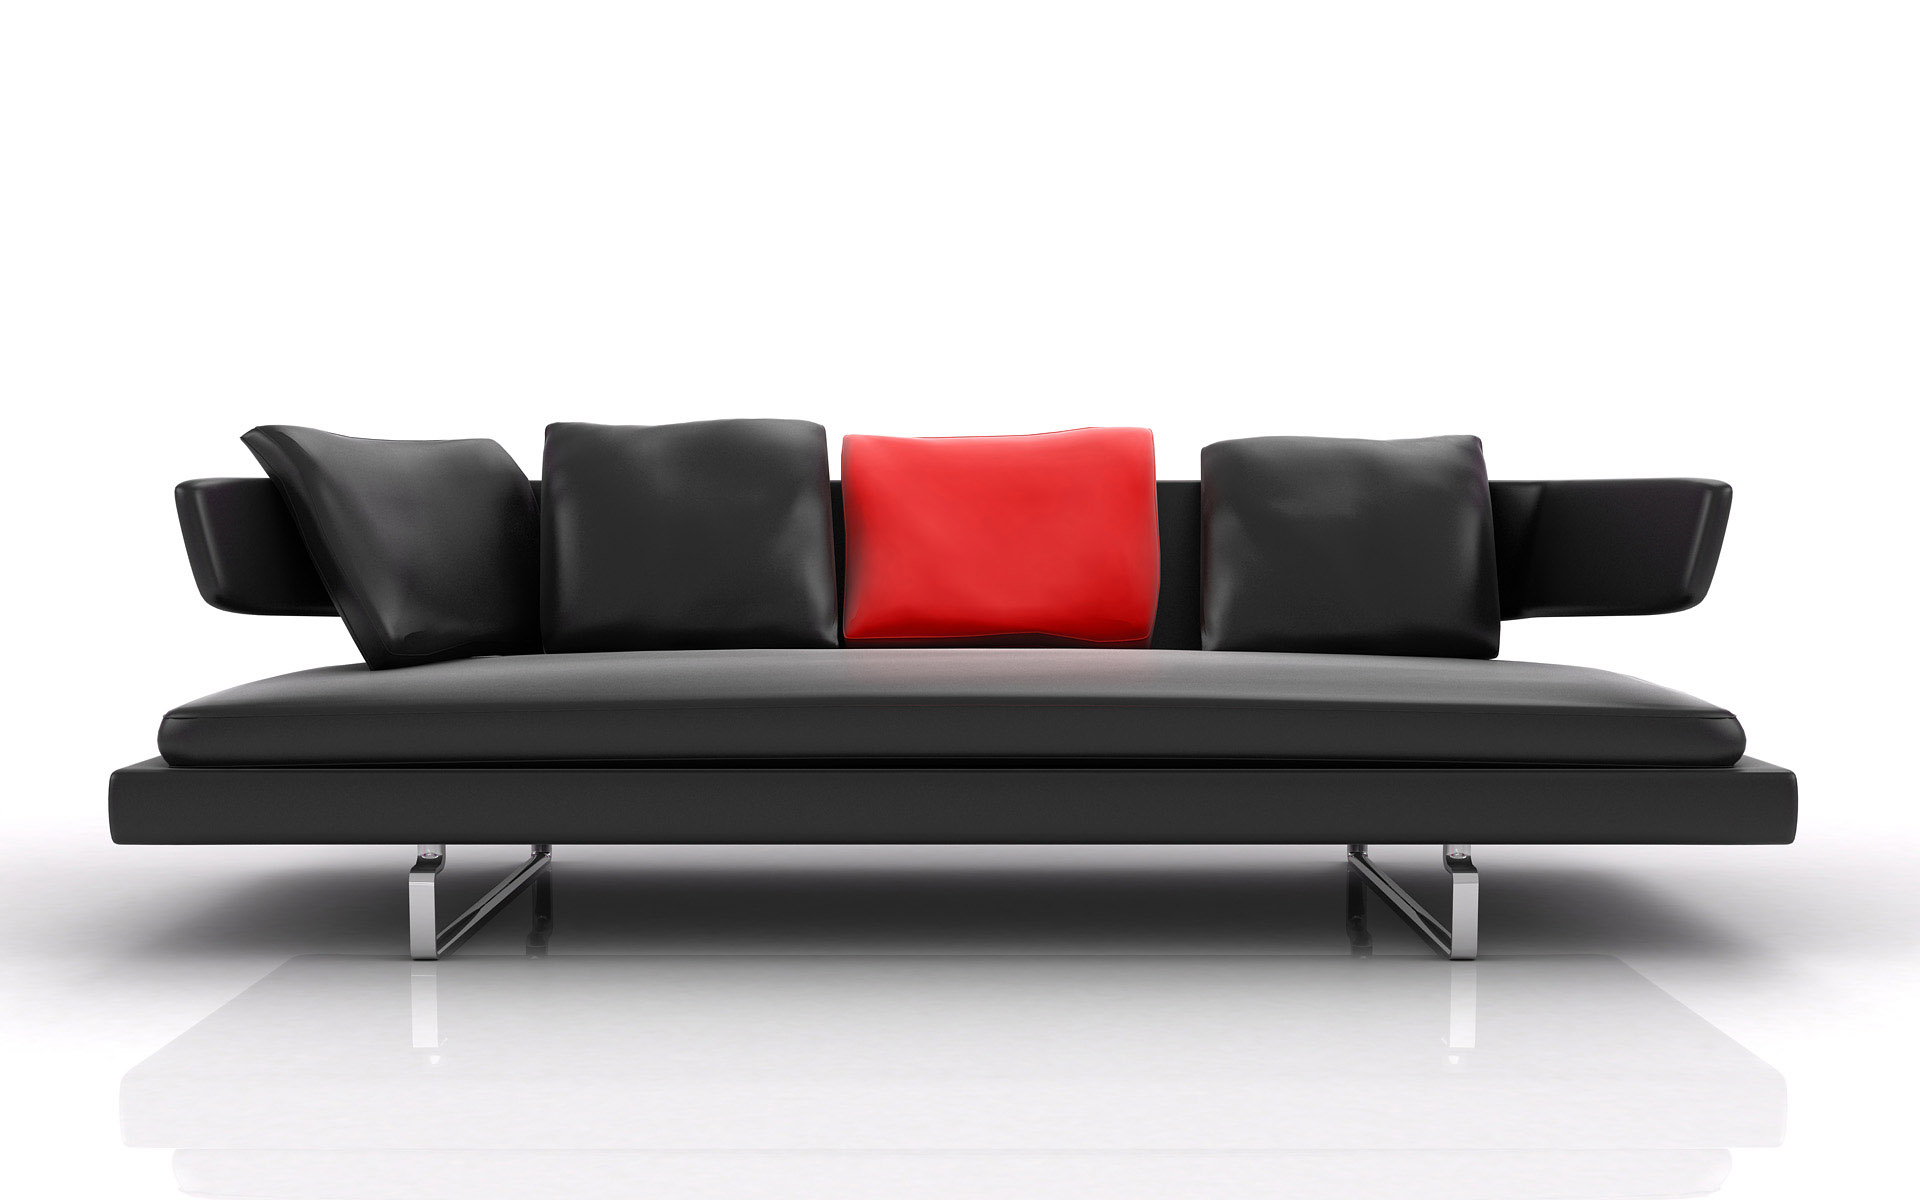 Design sofa wallpapers and images - wallpapers, pictures, photos